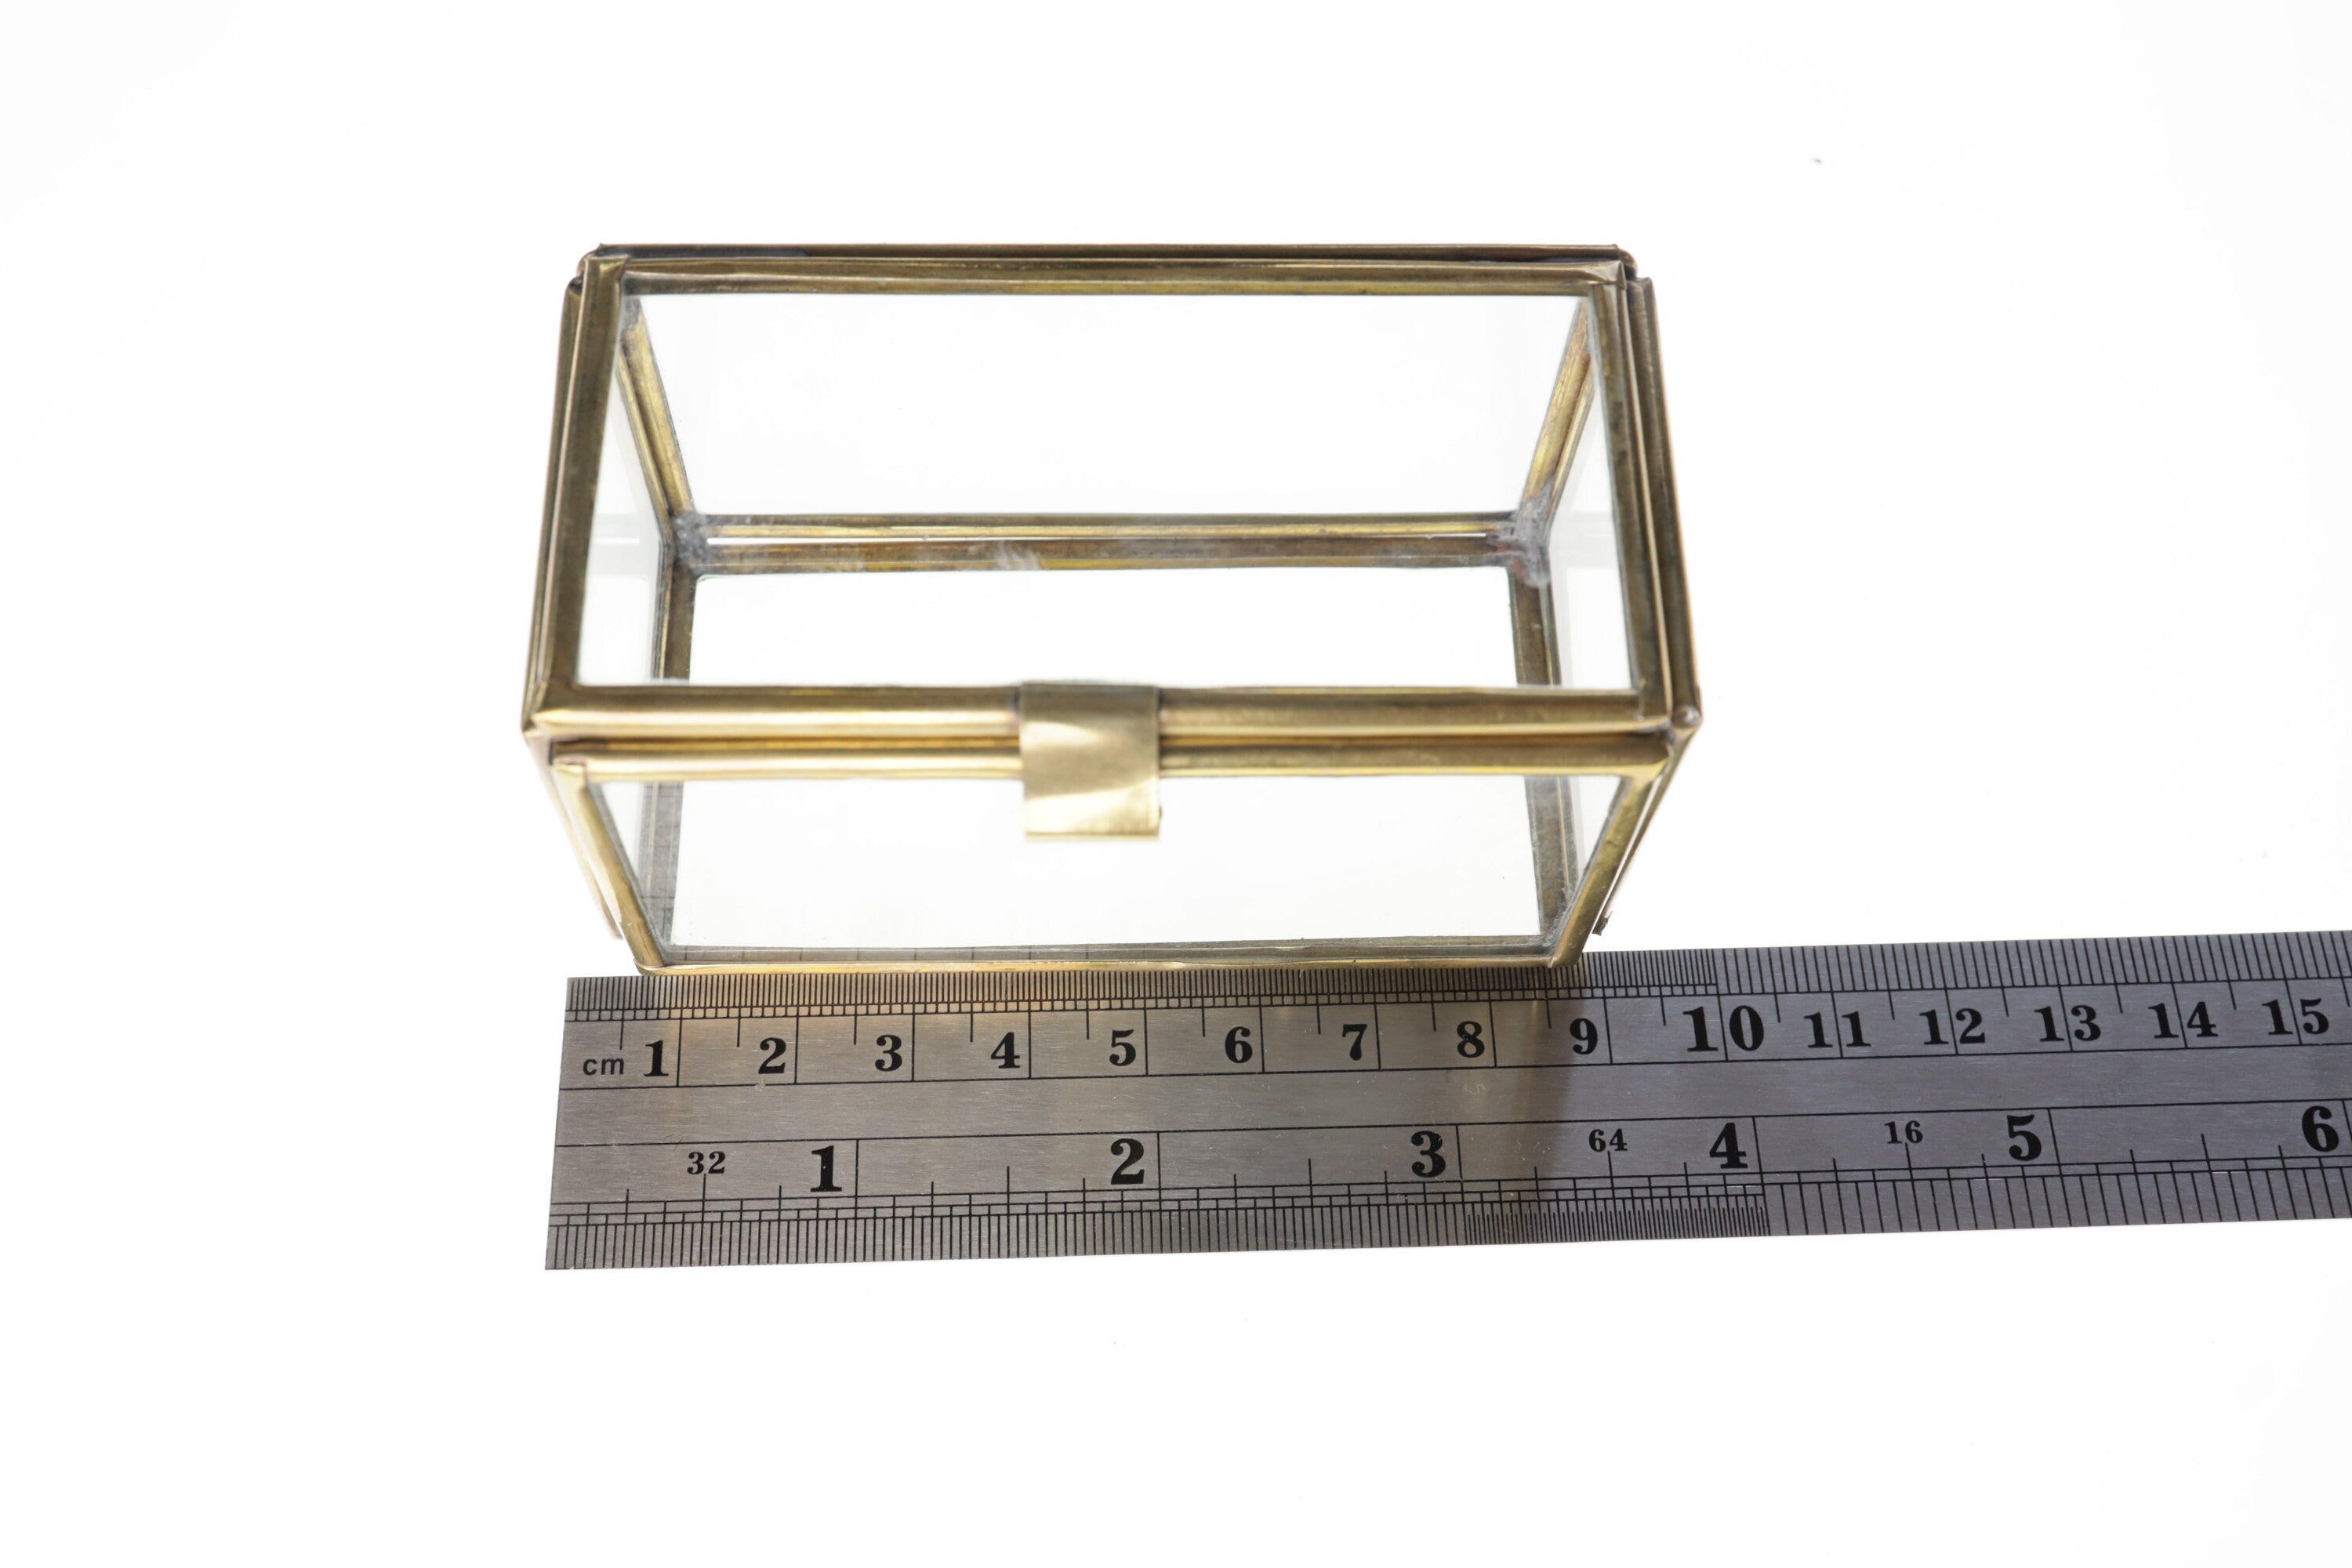 Handcrafted Elegance: Large Rectangular Premium Gem Display Box with Gold-Toned Brass Finish - Perfect for Jewelry & Gem Presentation